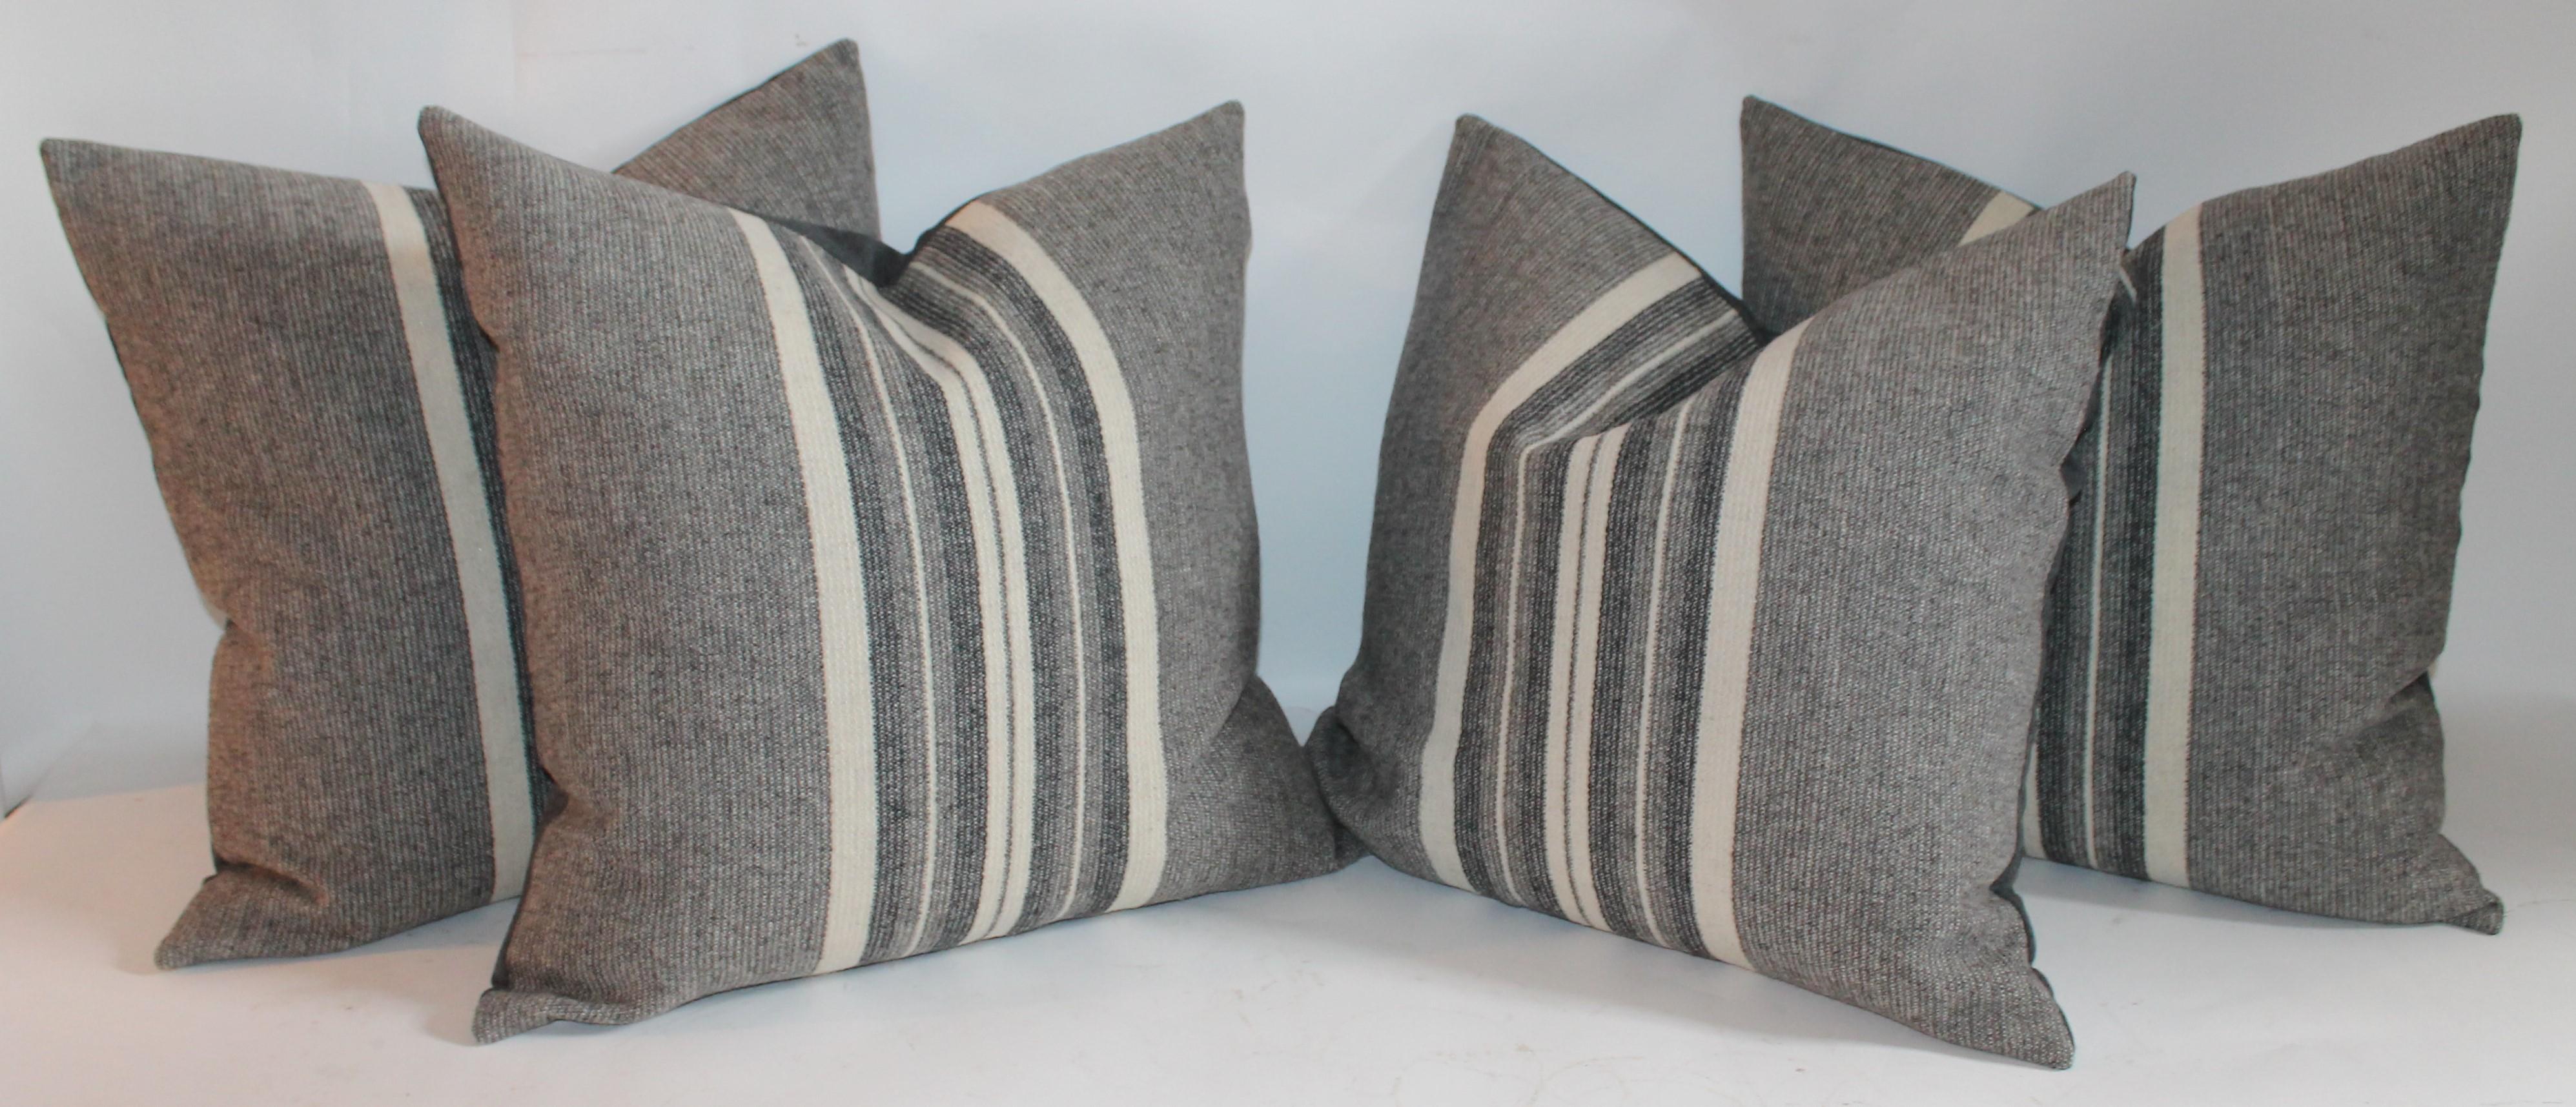 Wool Stripe Blanket Pillows Collection, Four 2